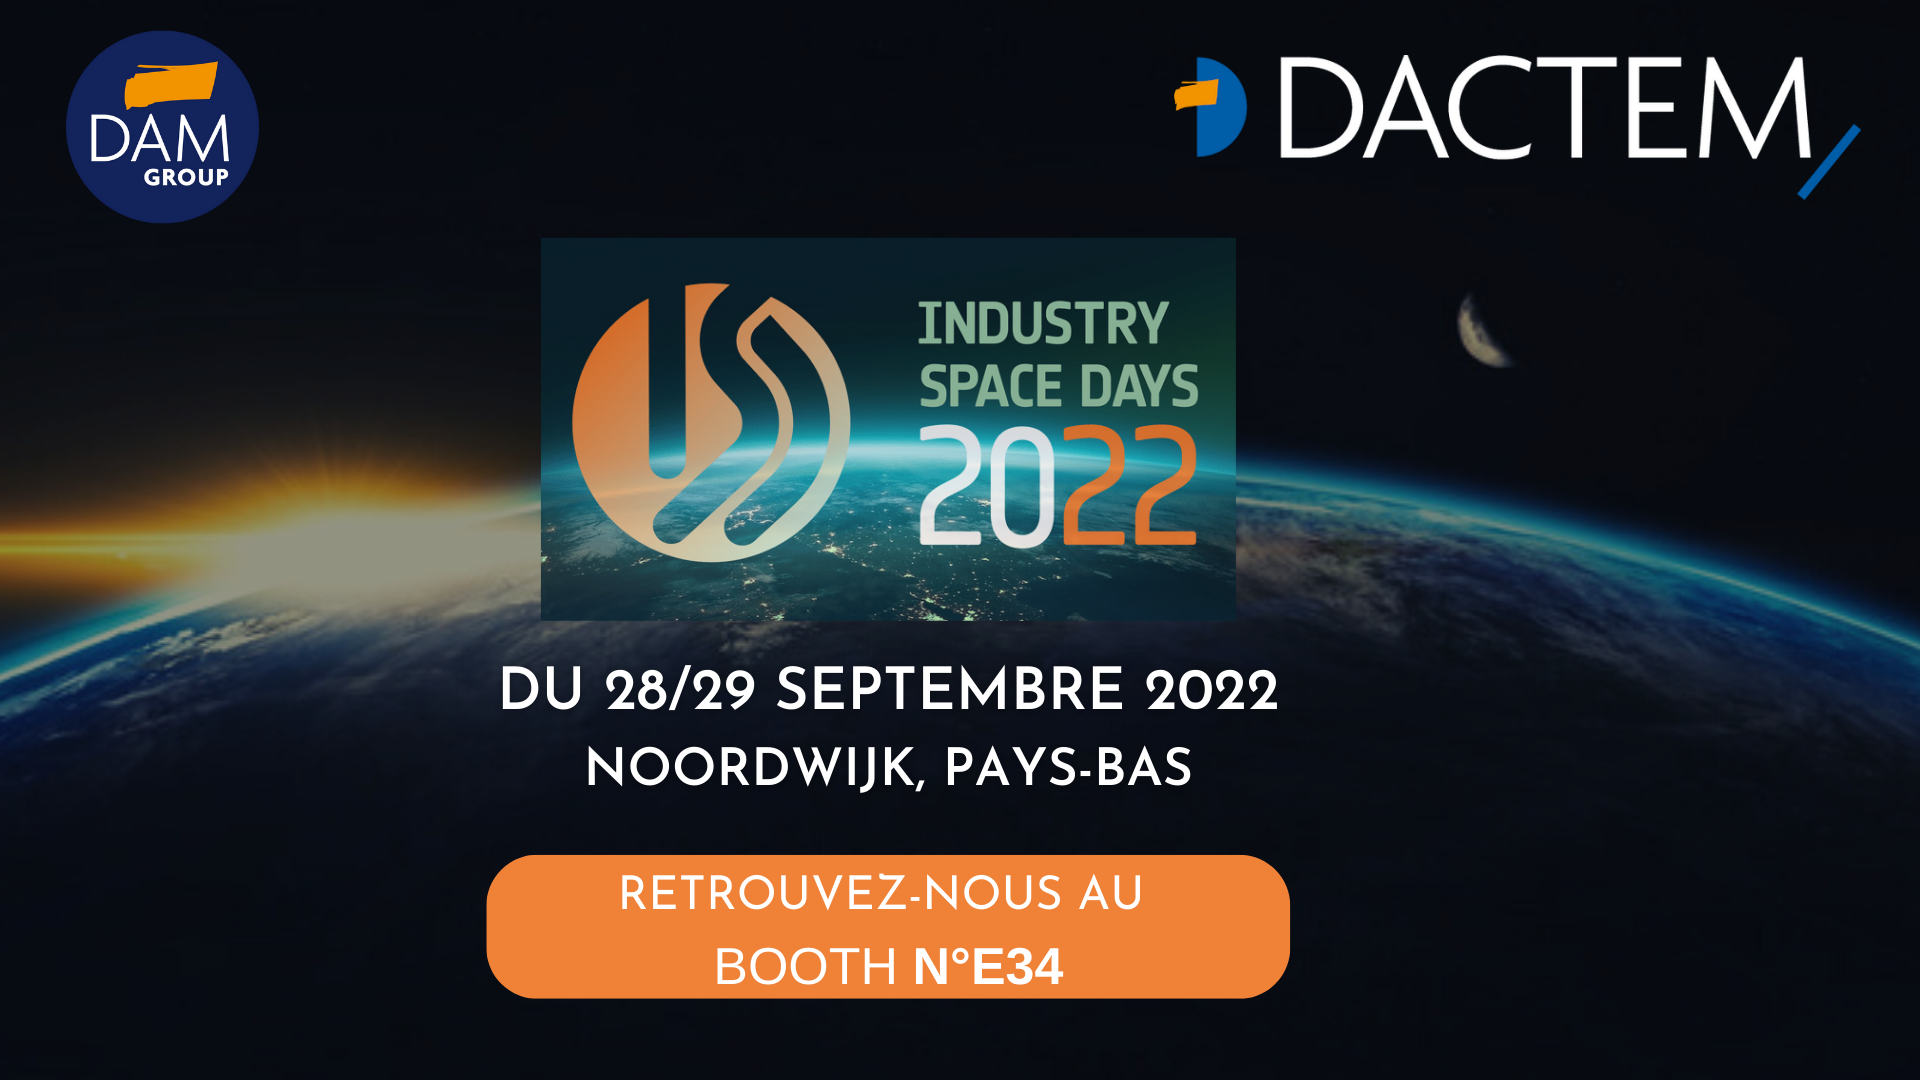 DACTEM PARTICIPATES IN THE EUROPEAN SPACE AGENCY’S “INDUSTRY SPACE DAYS